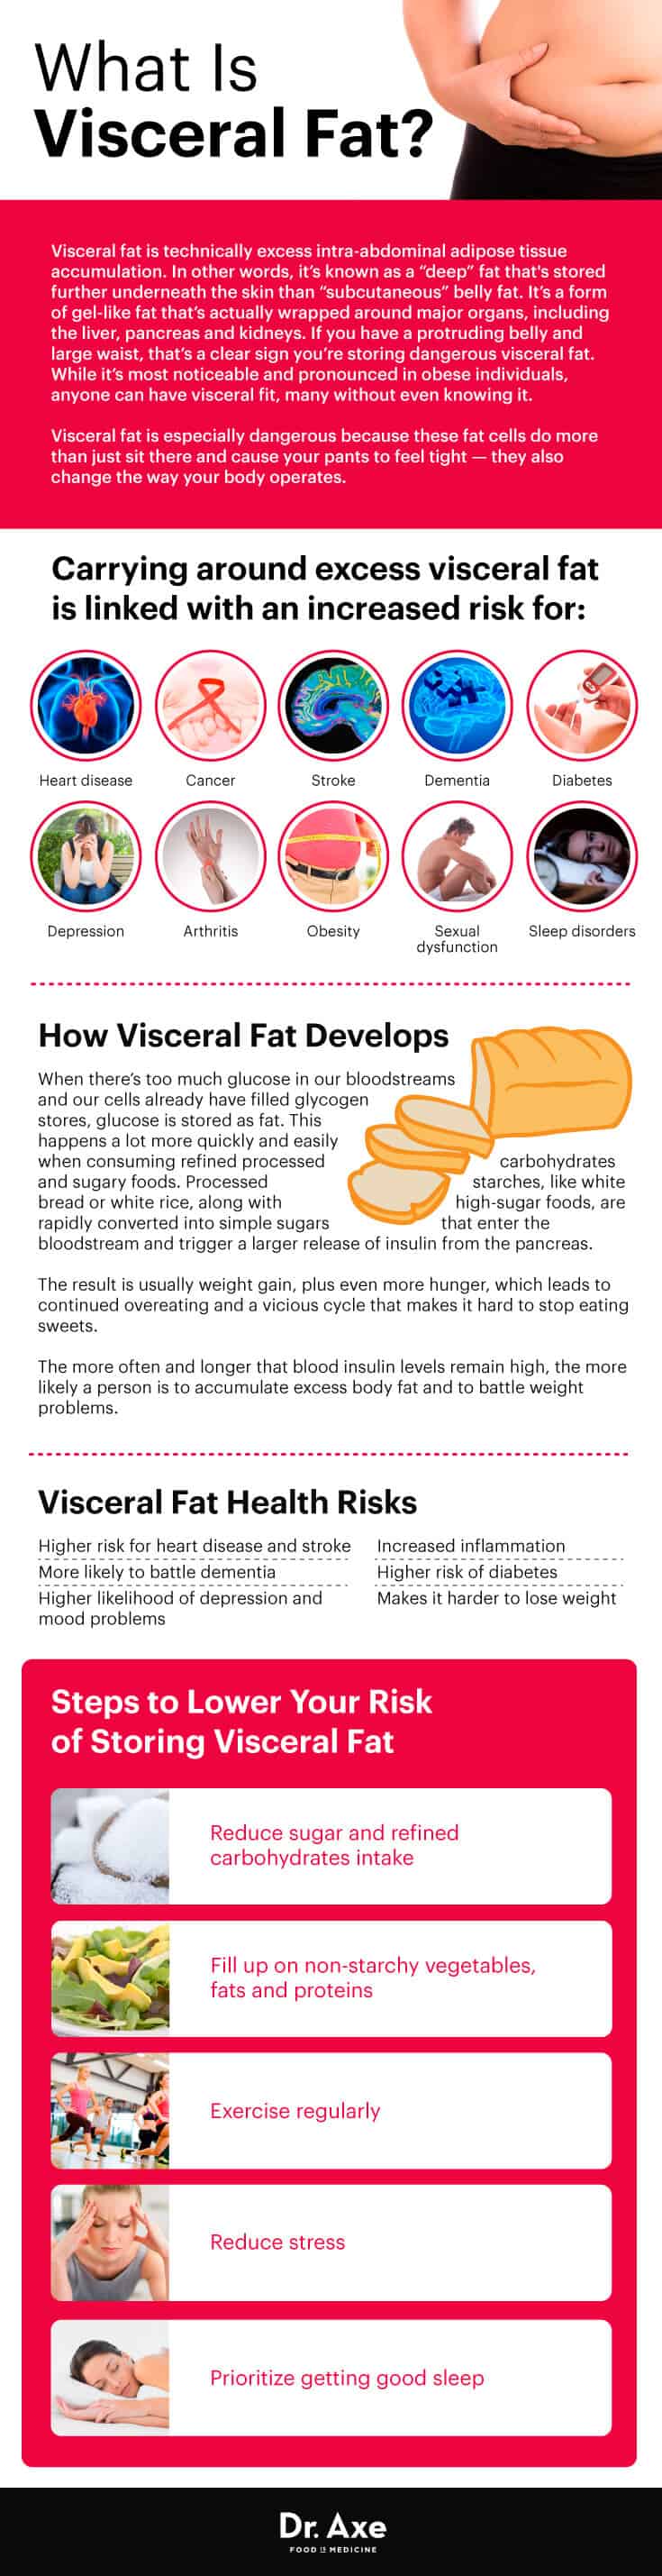 Visceral fat facts - Dr. Axe